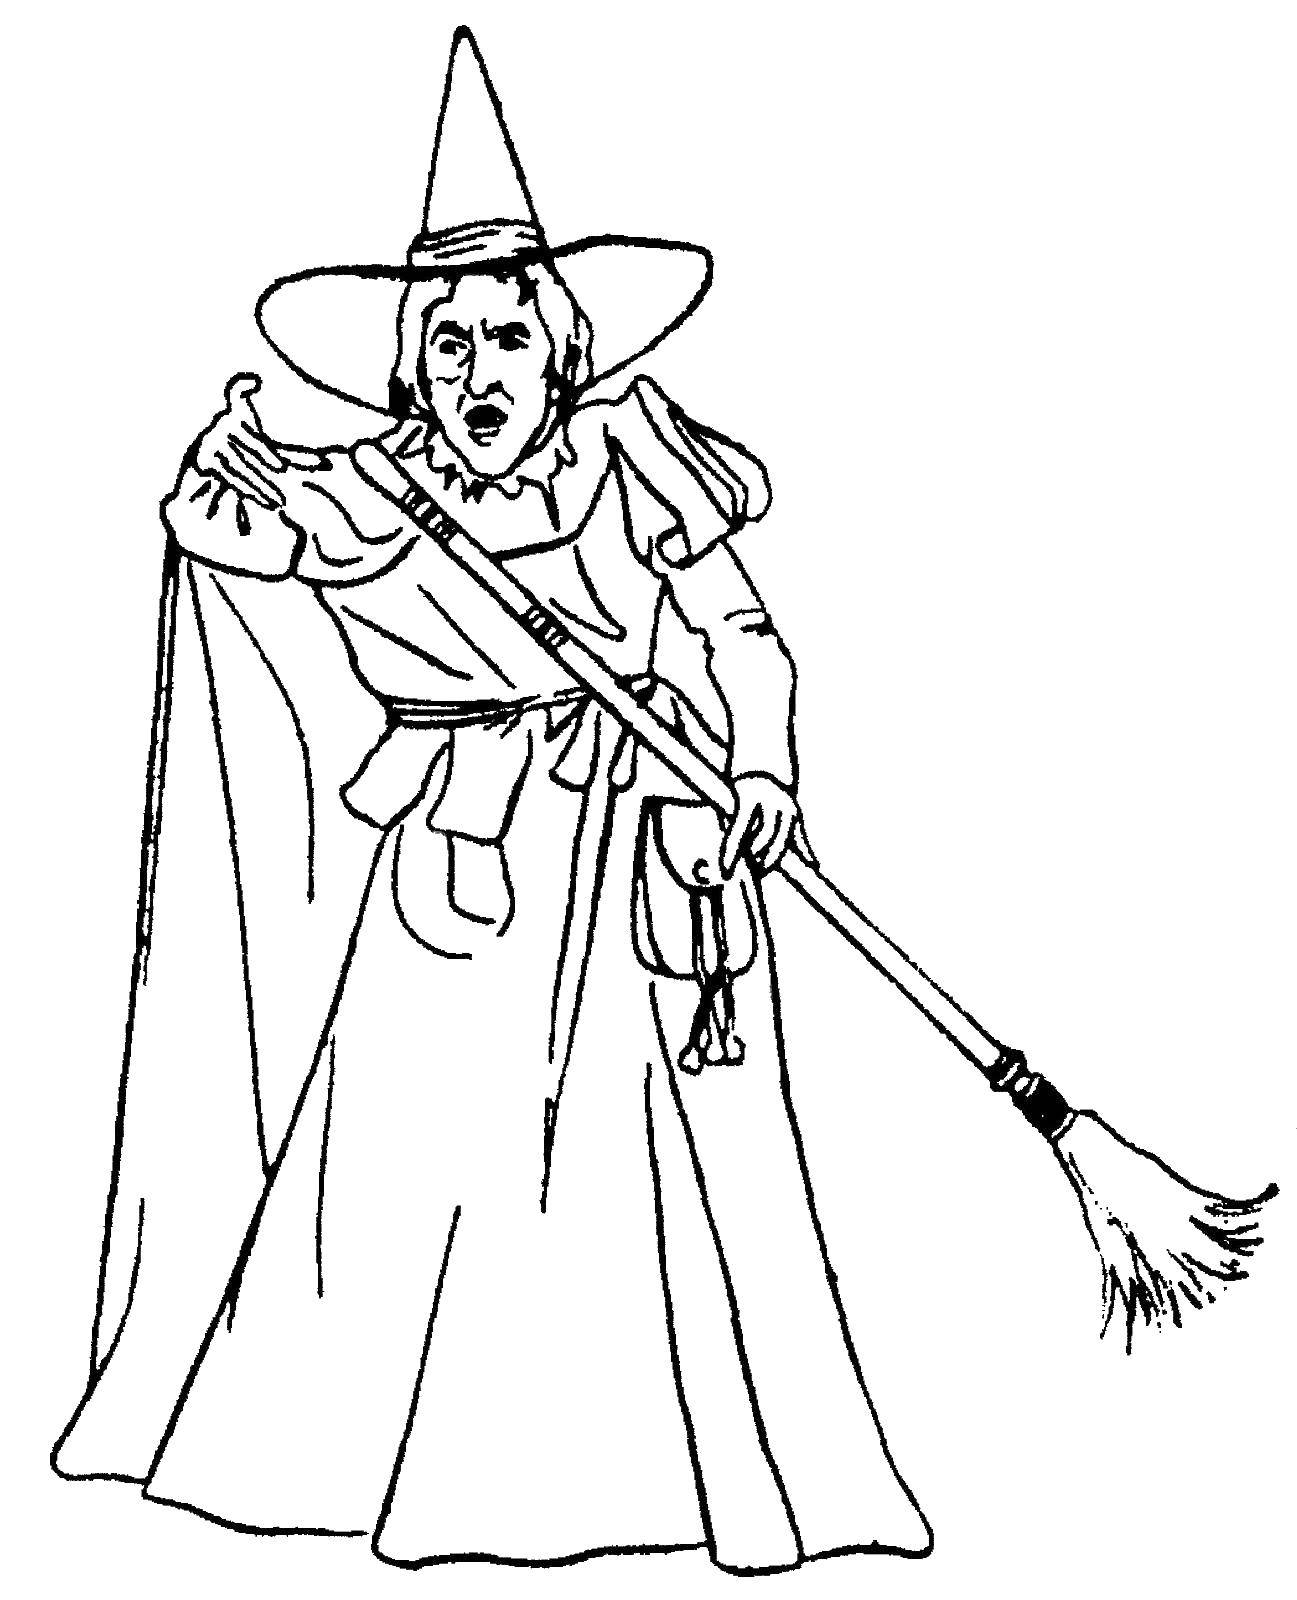 Coloring The old witch. Category witch. Tags:  witches.